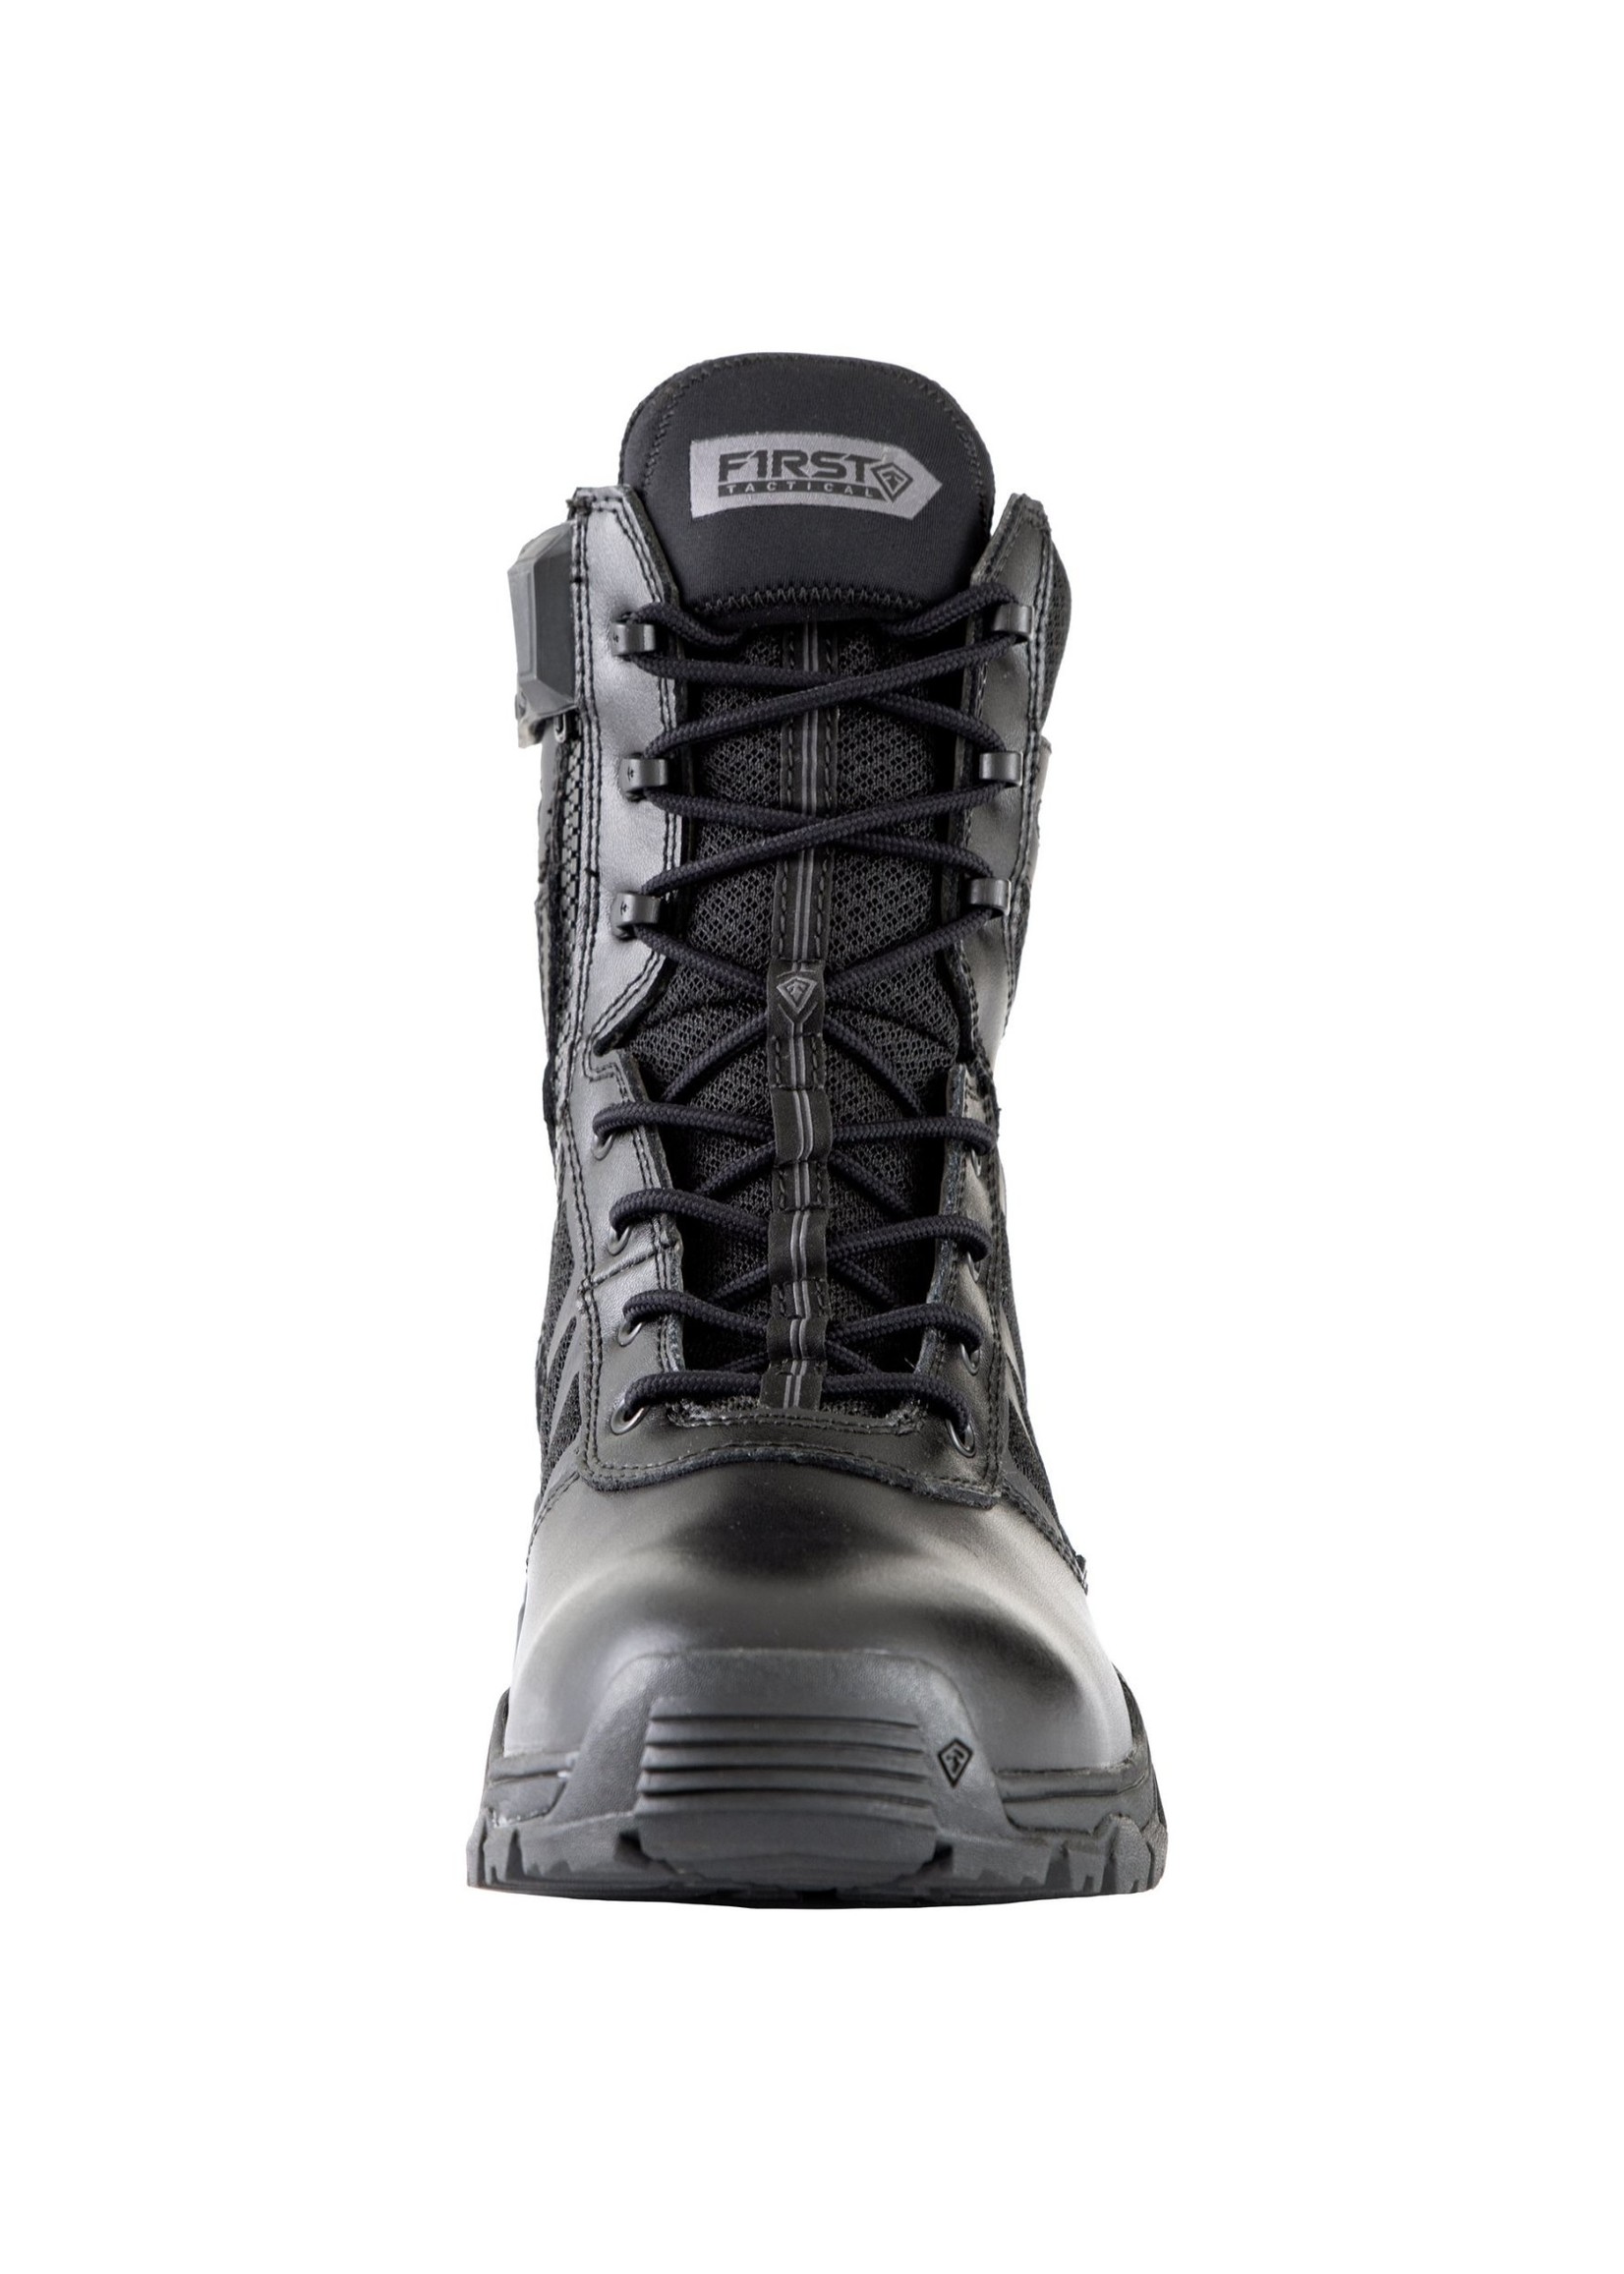 First Tactical First Tactical Men's Urban Operator Side-Zip Boot